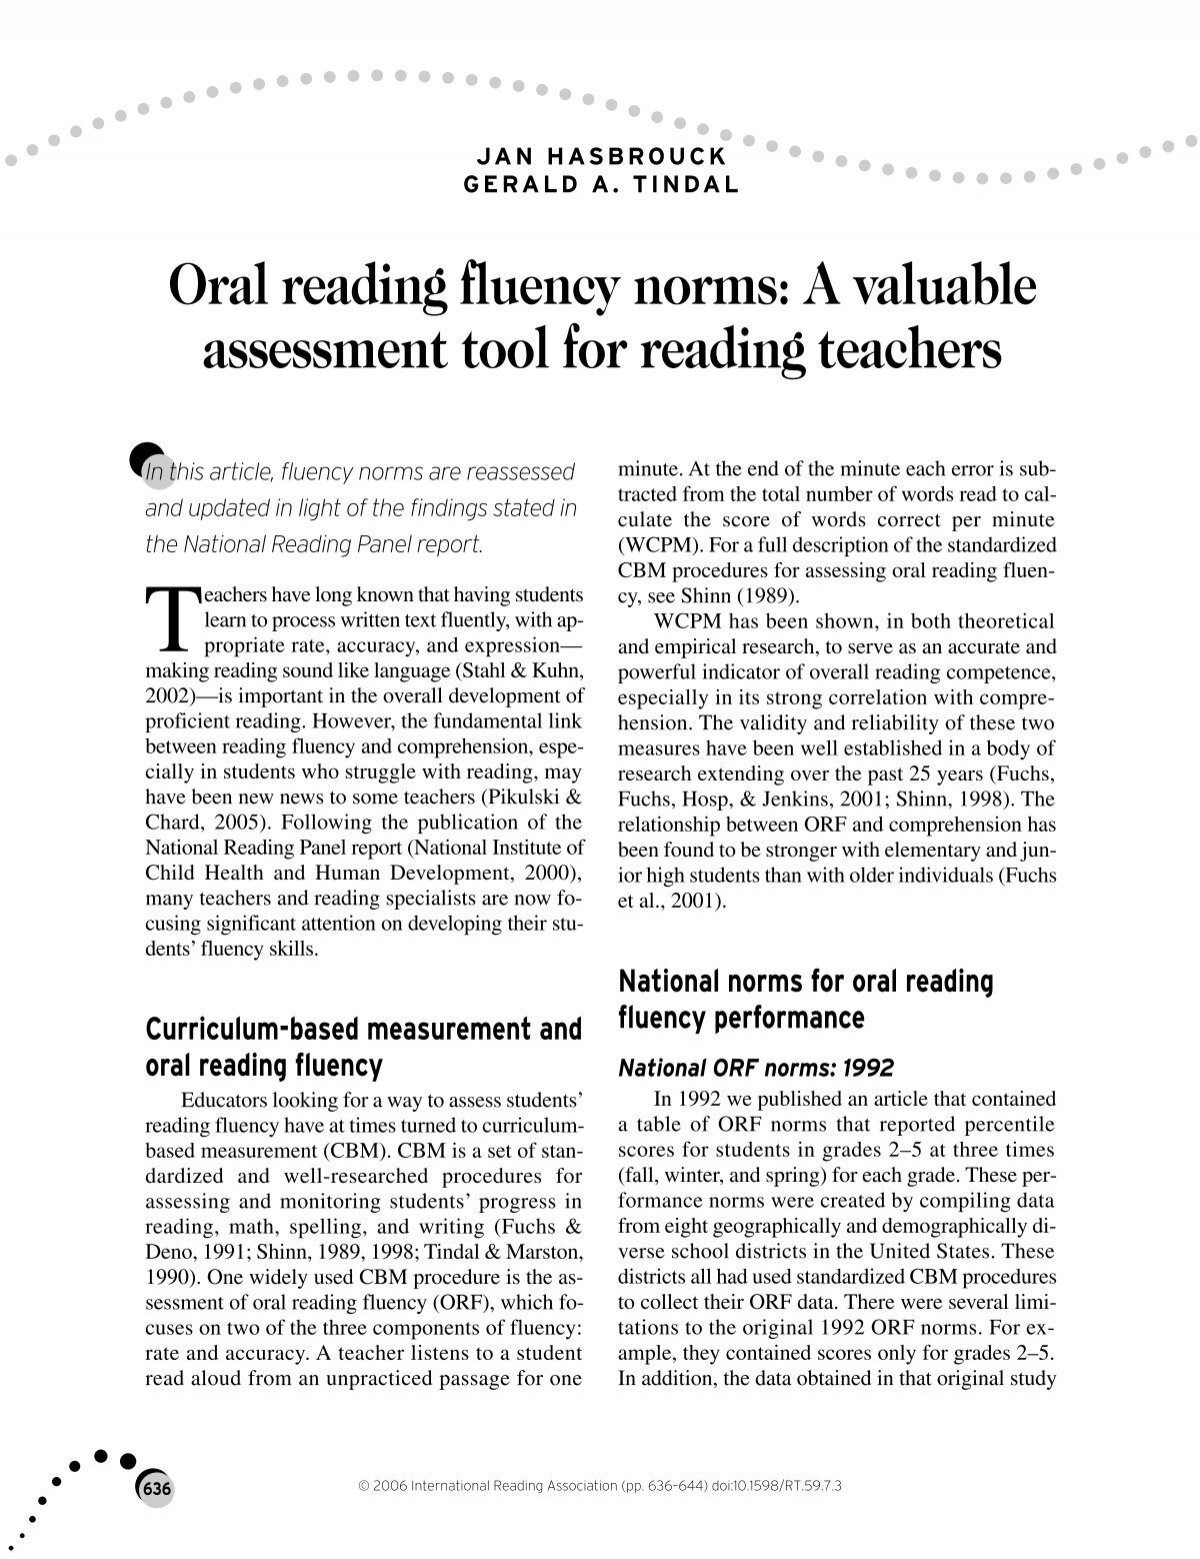 oral-reading-fluency-norms-a-valuable-assessment-tool-for-reading